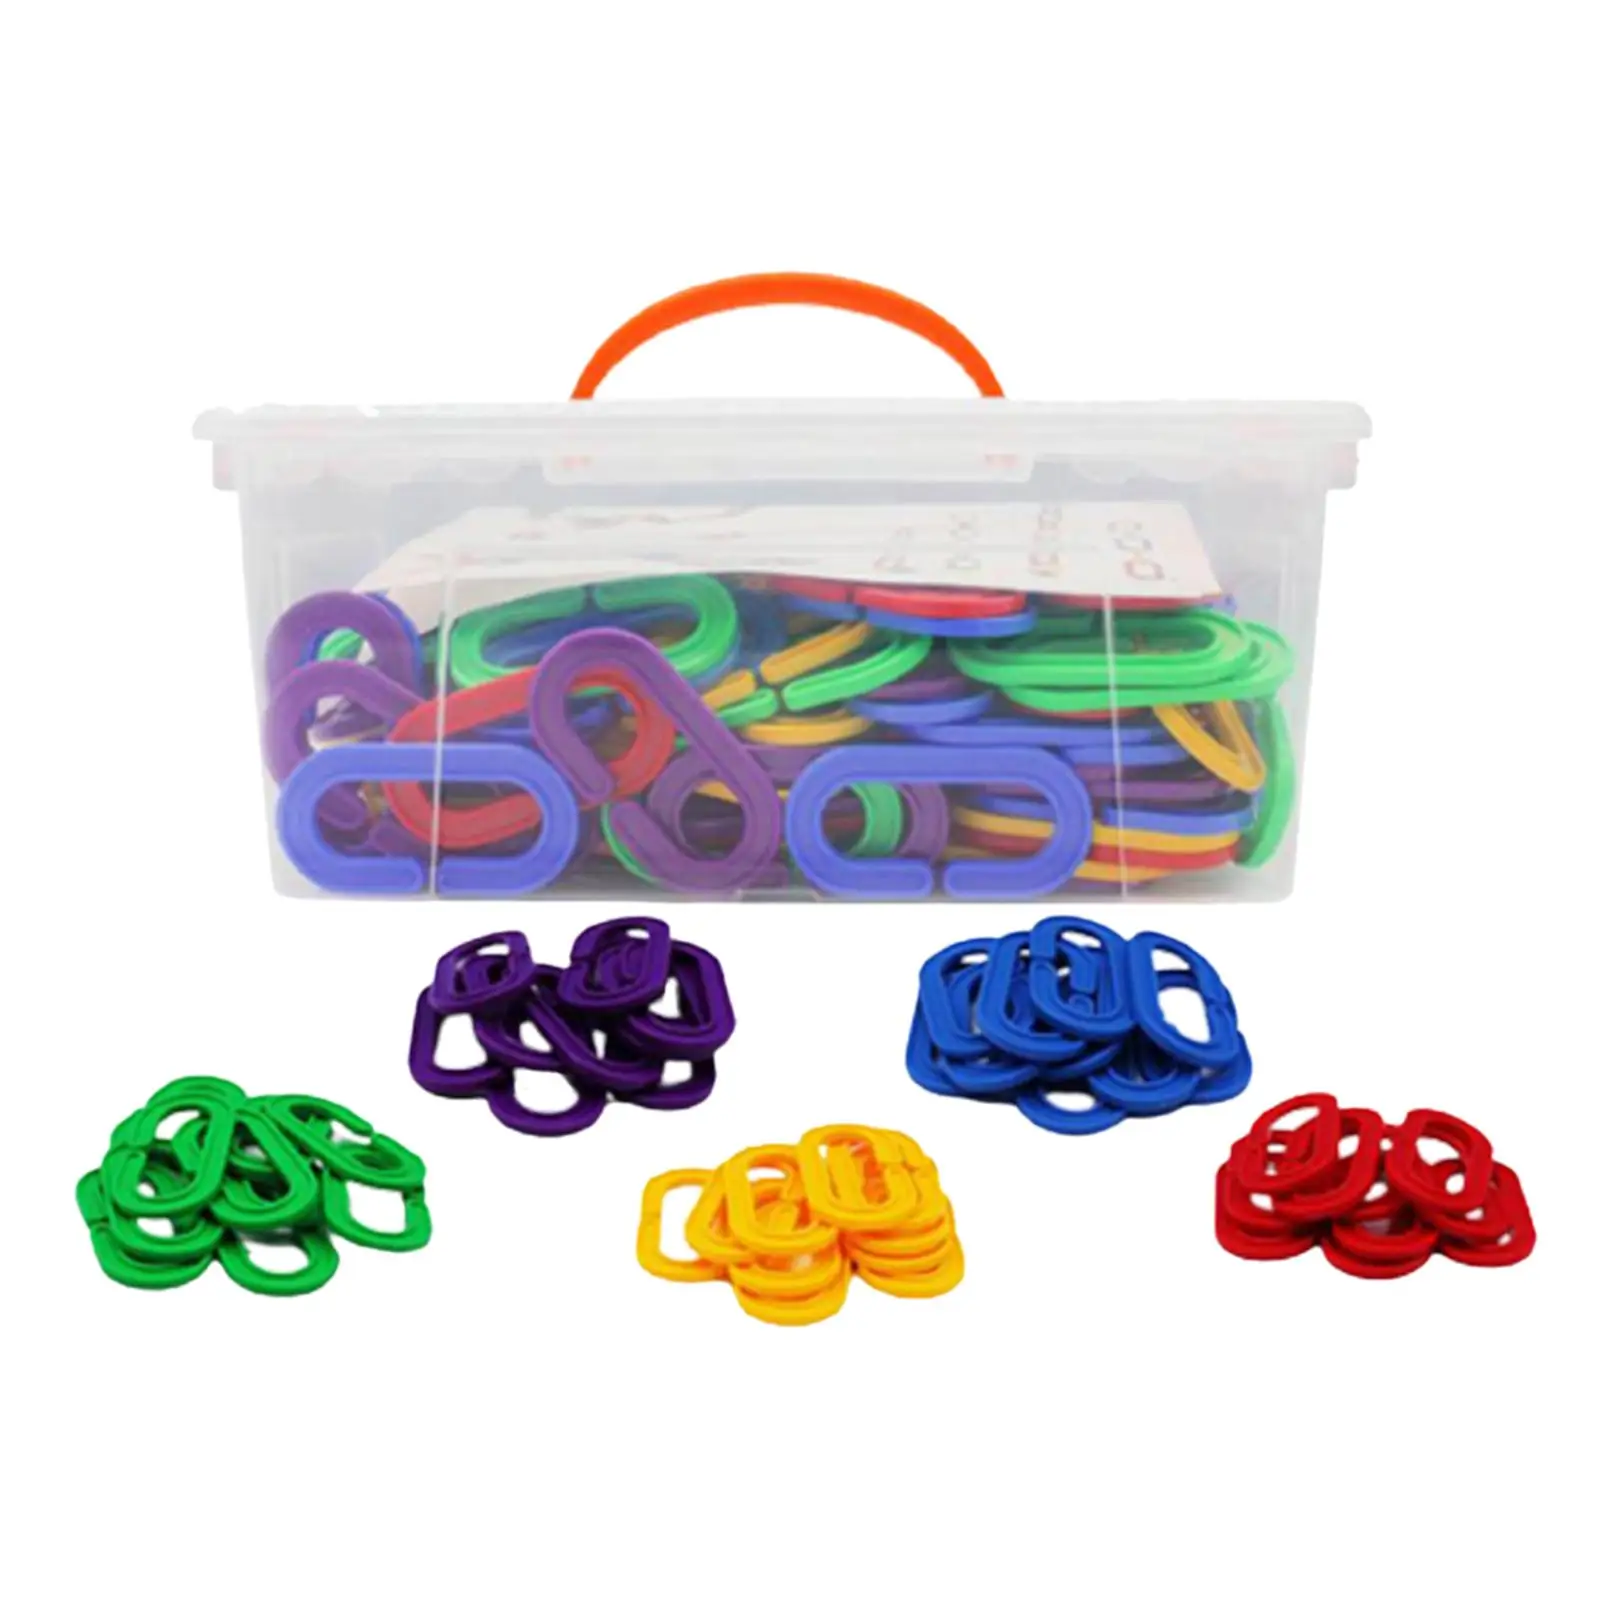 150Pcs C Hook DIY Toys Counting and Sorting Educational Sensory Toys Chain Links for Playroom Preschool Kids